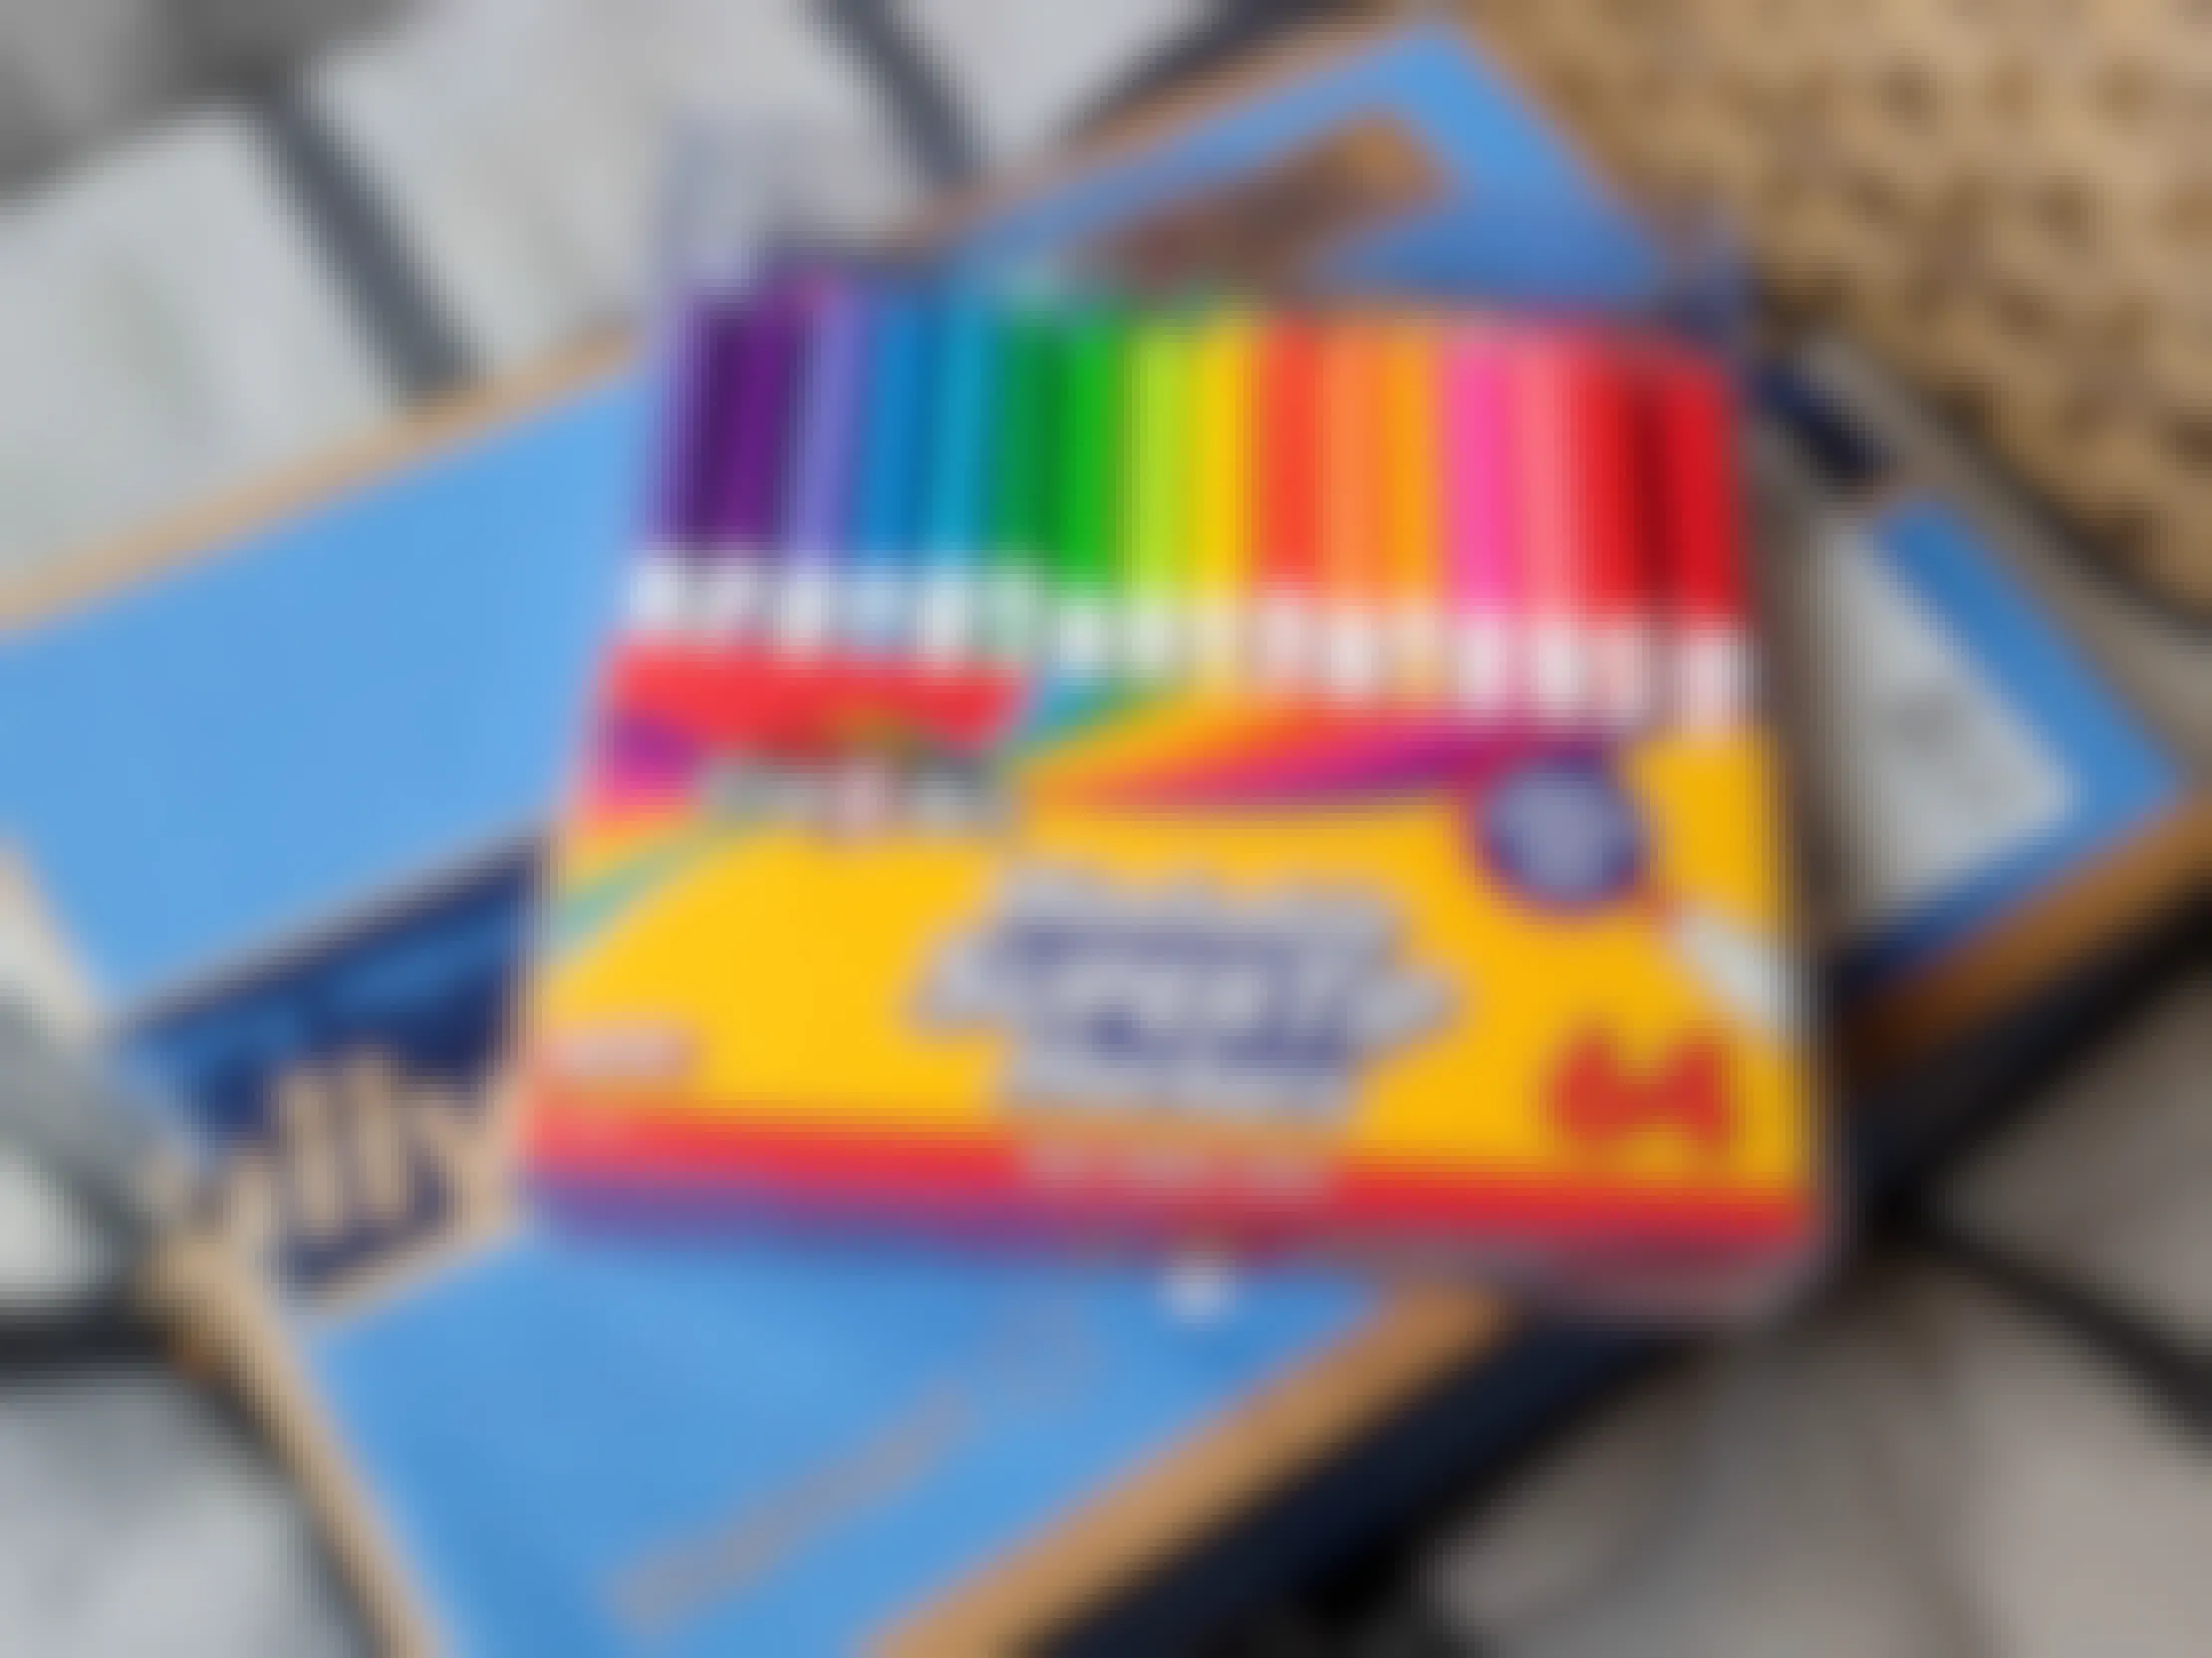 A 64 pack of Cra-Z-Art washable supertip markers on top of a Walmart delivery box.